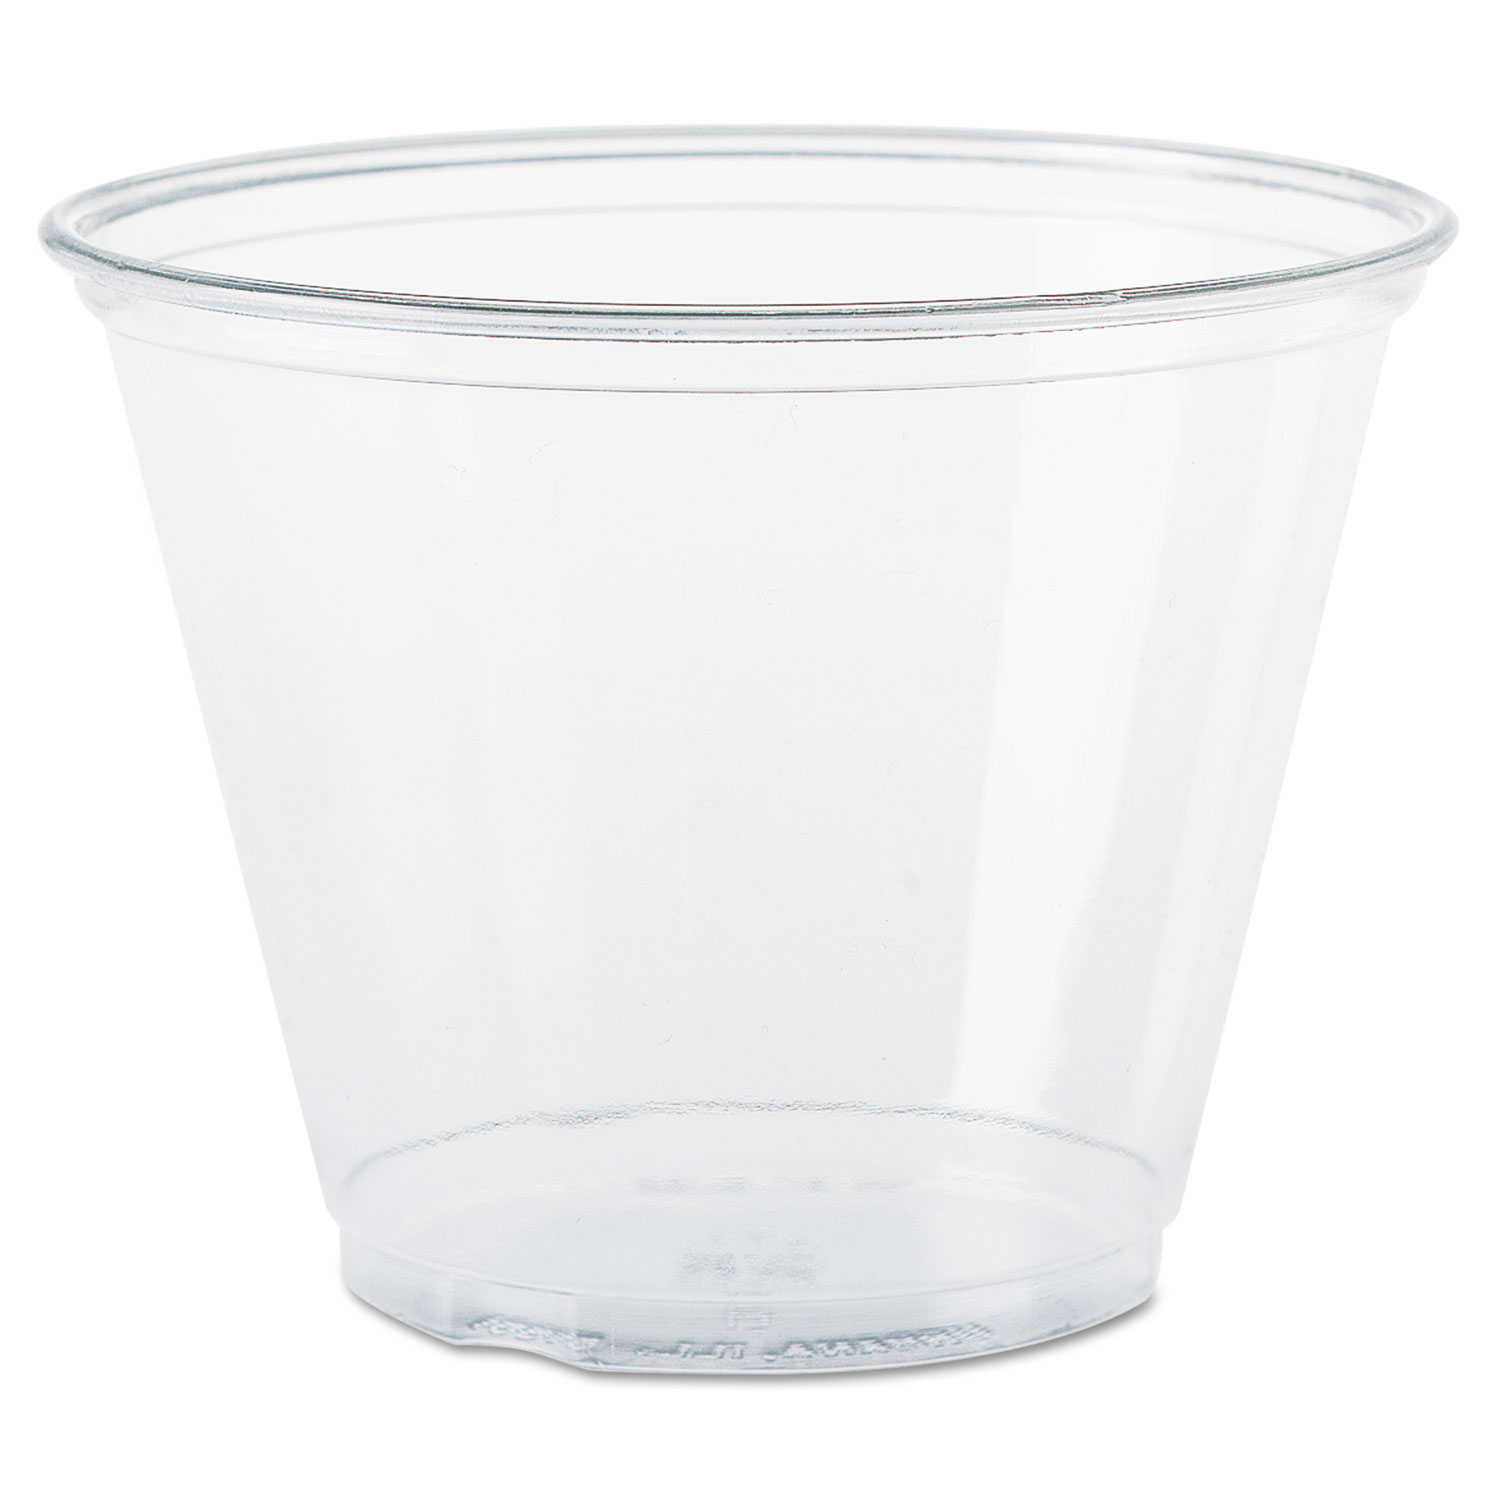 Solo UltraClear Plastic Pet Cups